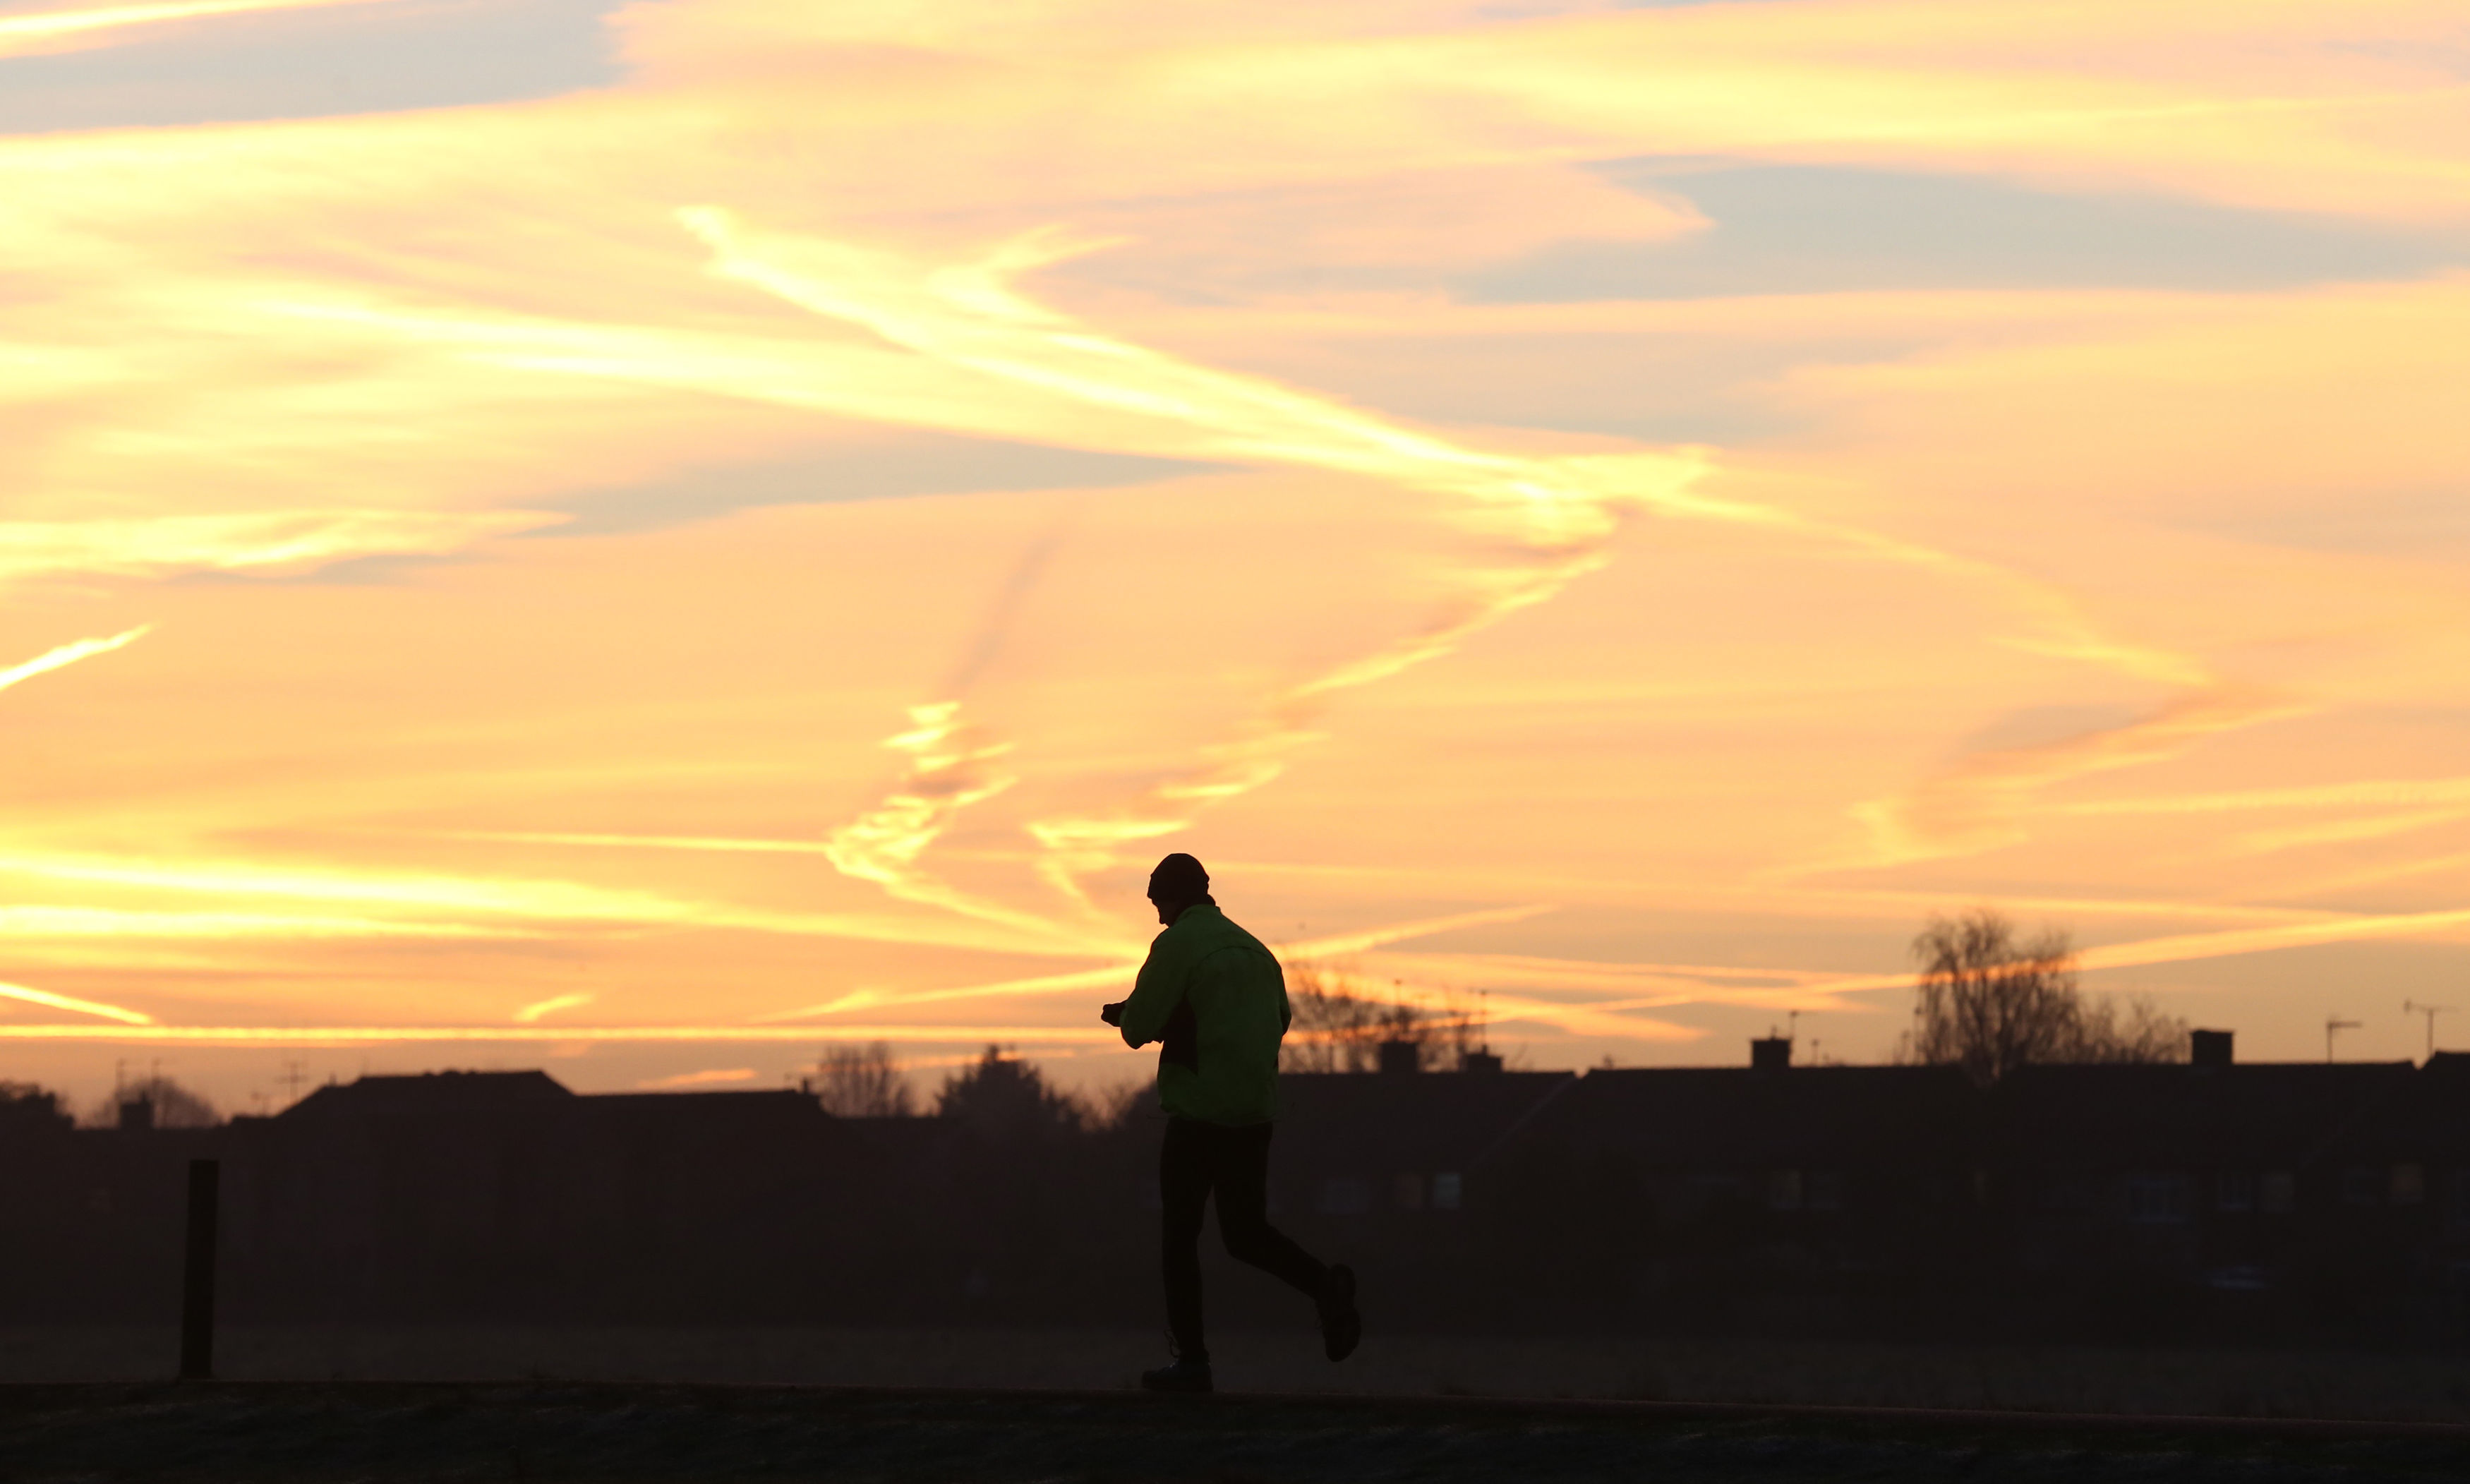 A man gets ready to jog in the countryside at sunrise.